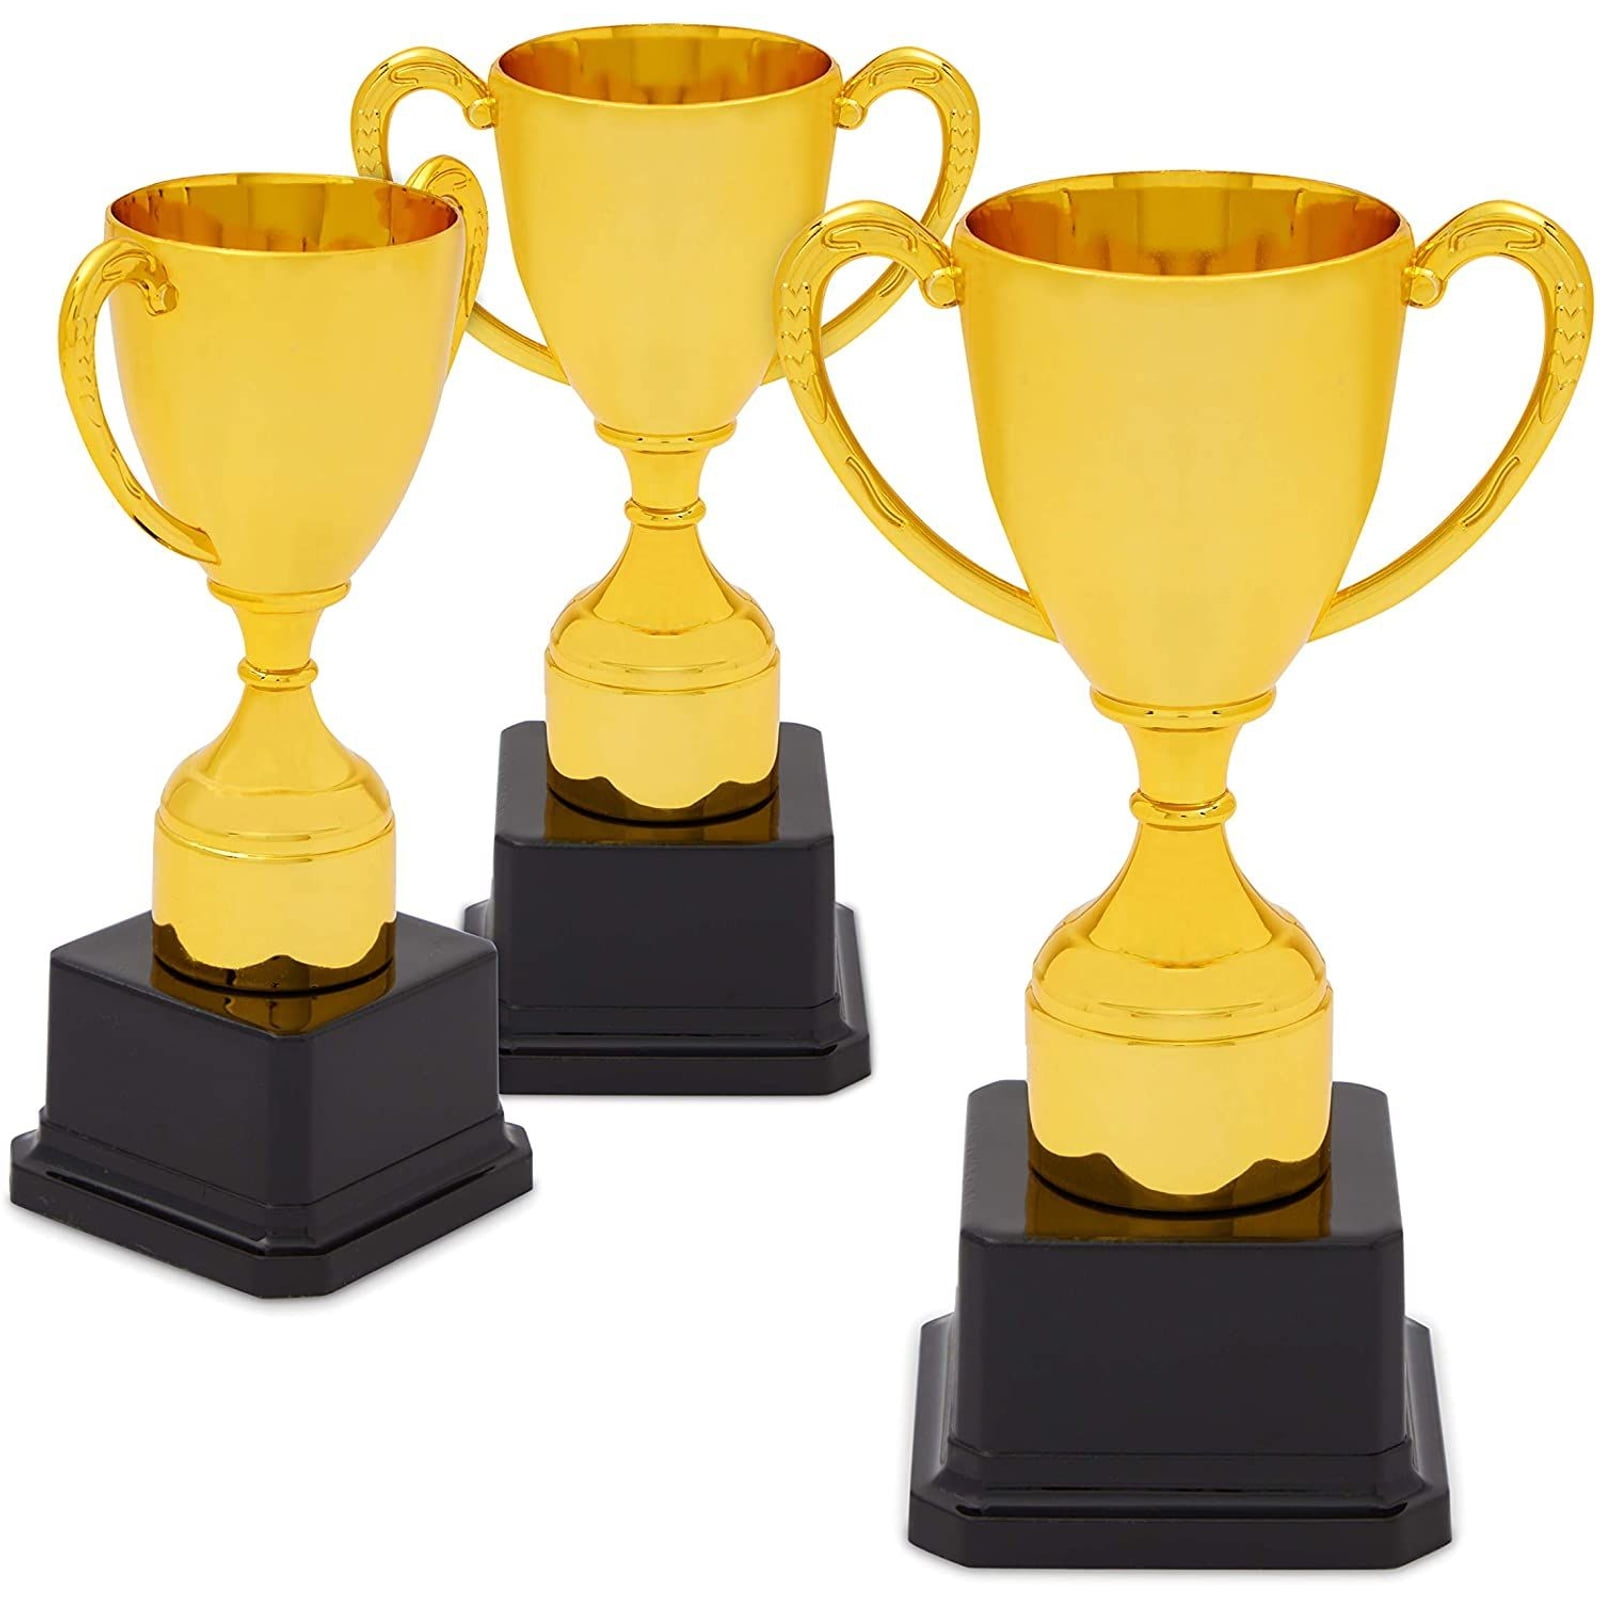 STAR GOLD CHILDS CHILDREN TROPHY ENGRAVED FREE CONGRATS MINI STAR TROPHIES 